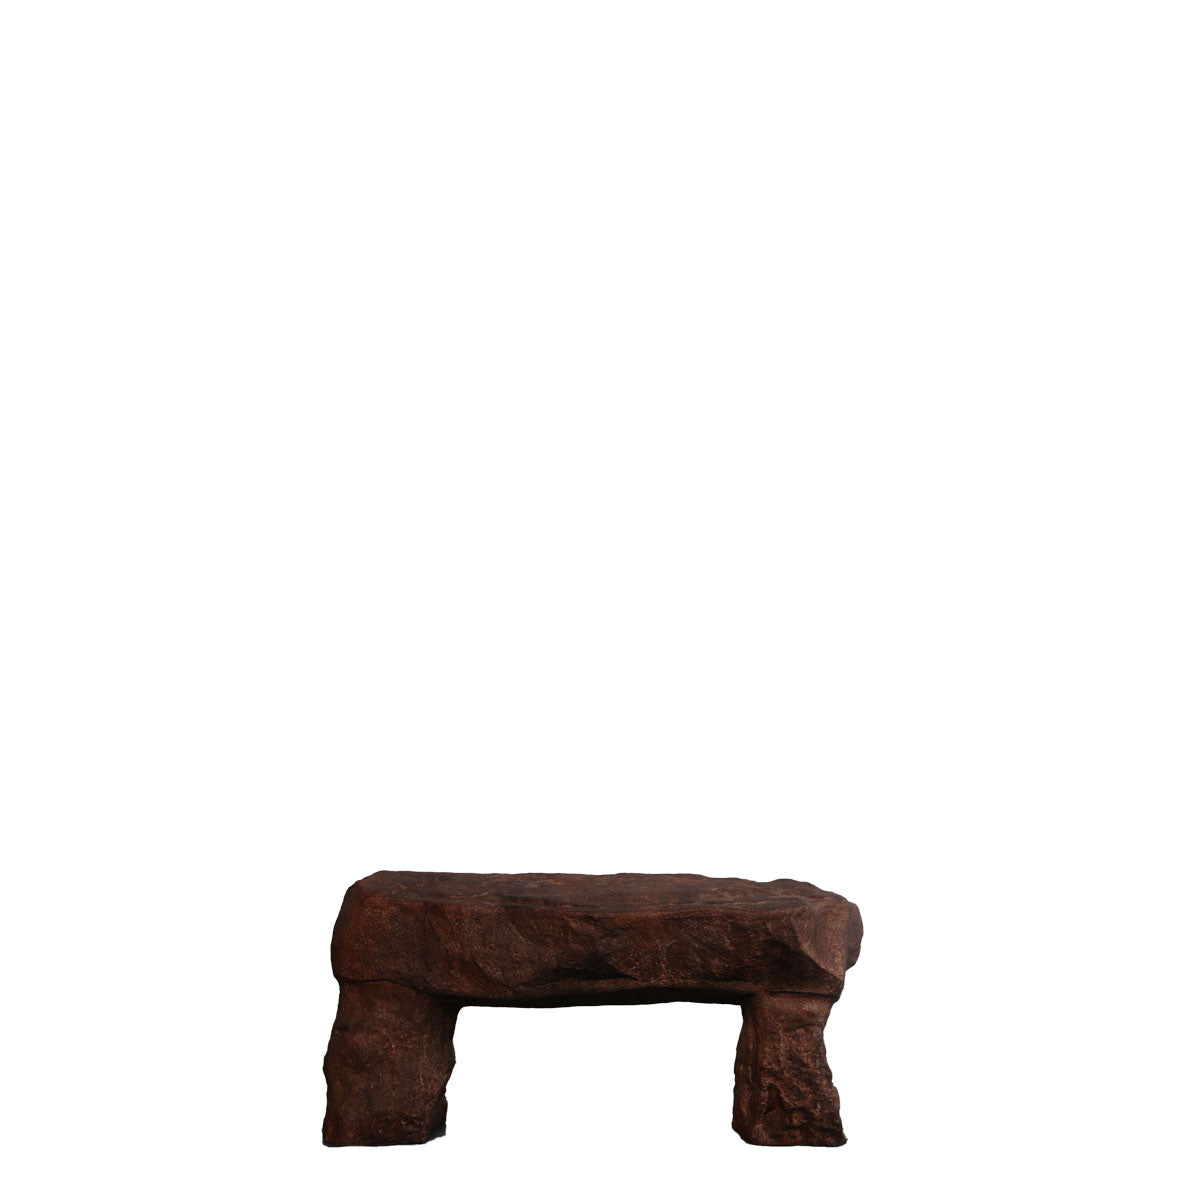 Small Rock Bench Statue